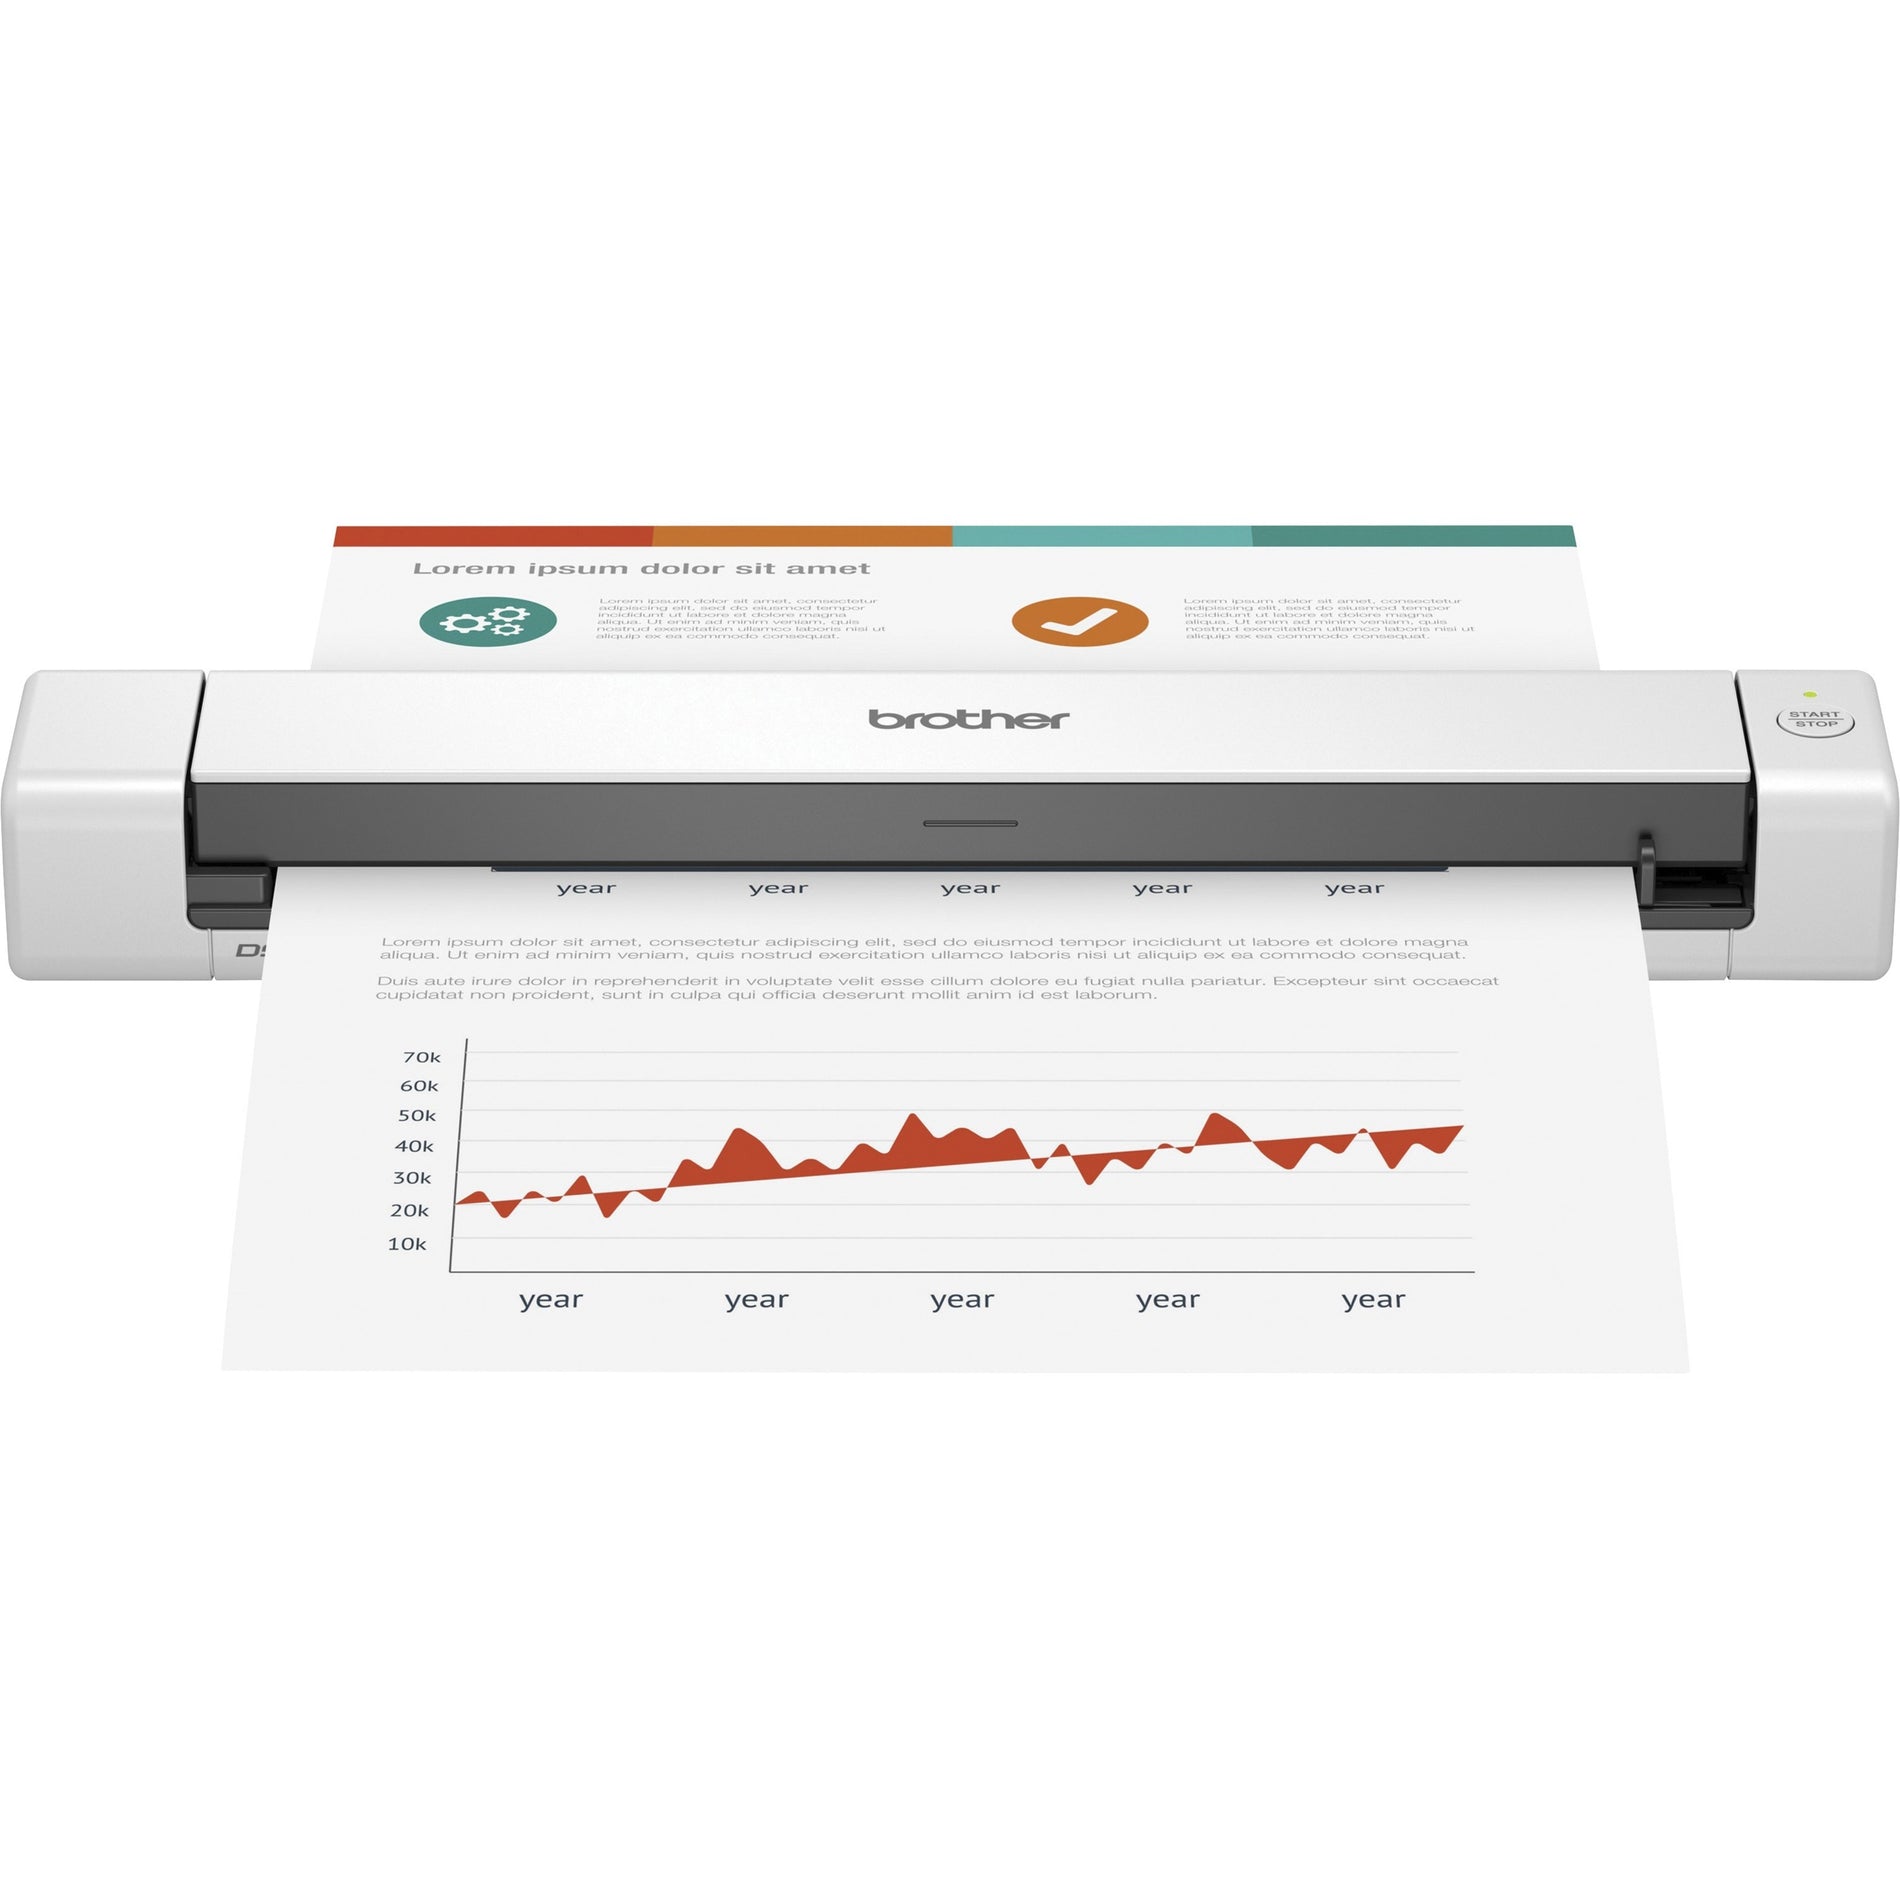 Brother DS-640 Compact Mobile Document Scanner - Scan Color, 600 dpi Optical